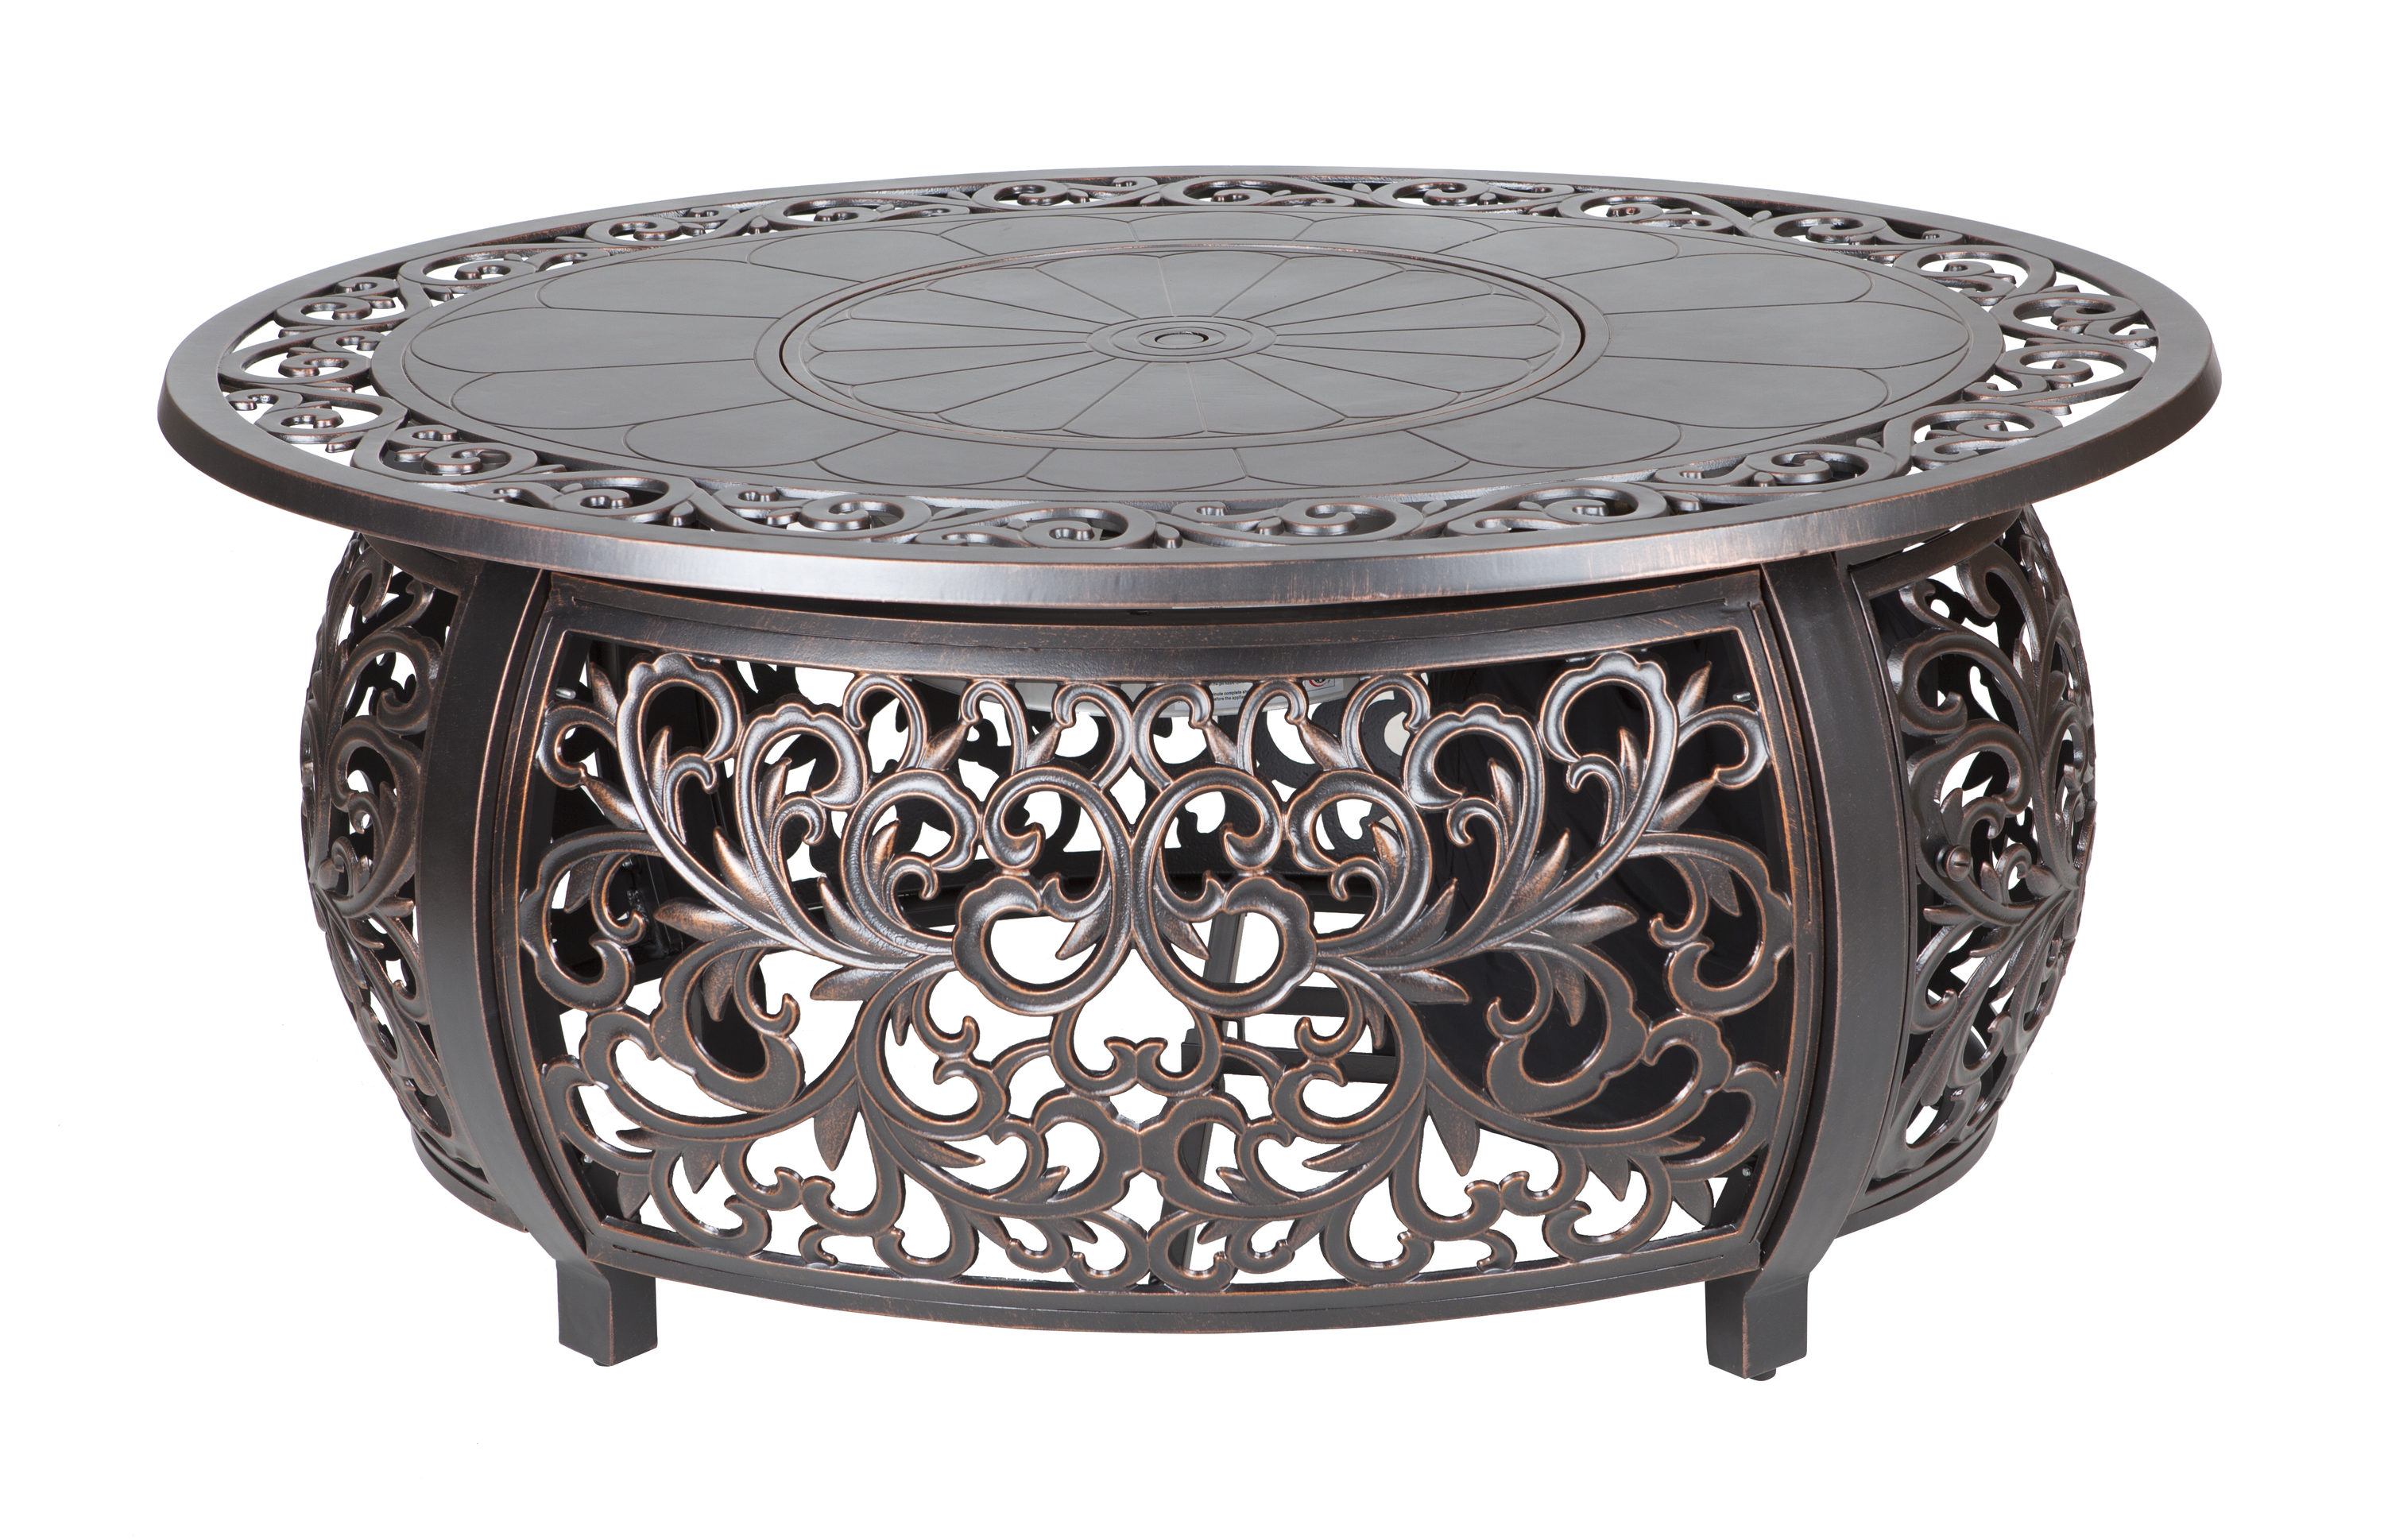 Gas Fire Pit Table In The Pits, Cast Aluminum Gas Fire Pit Table